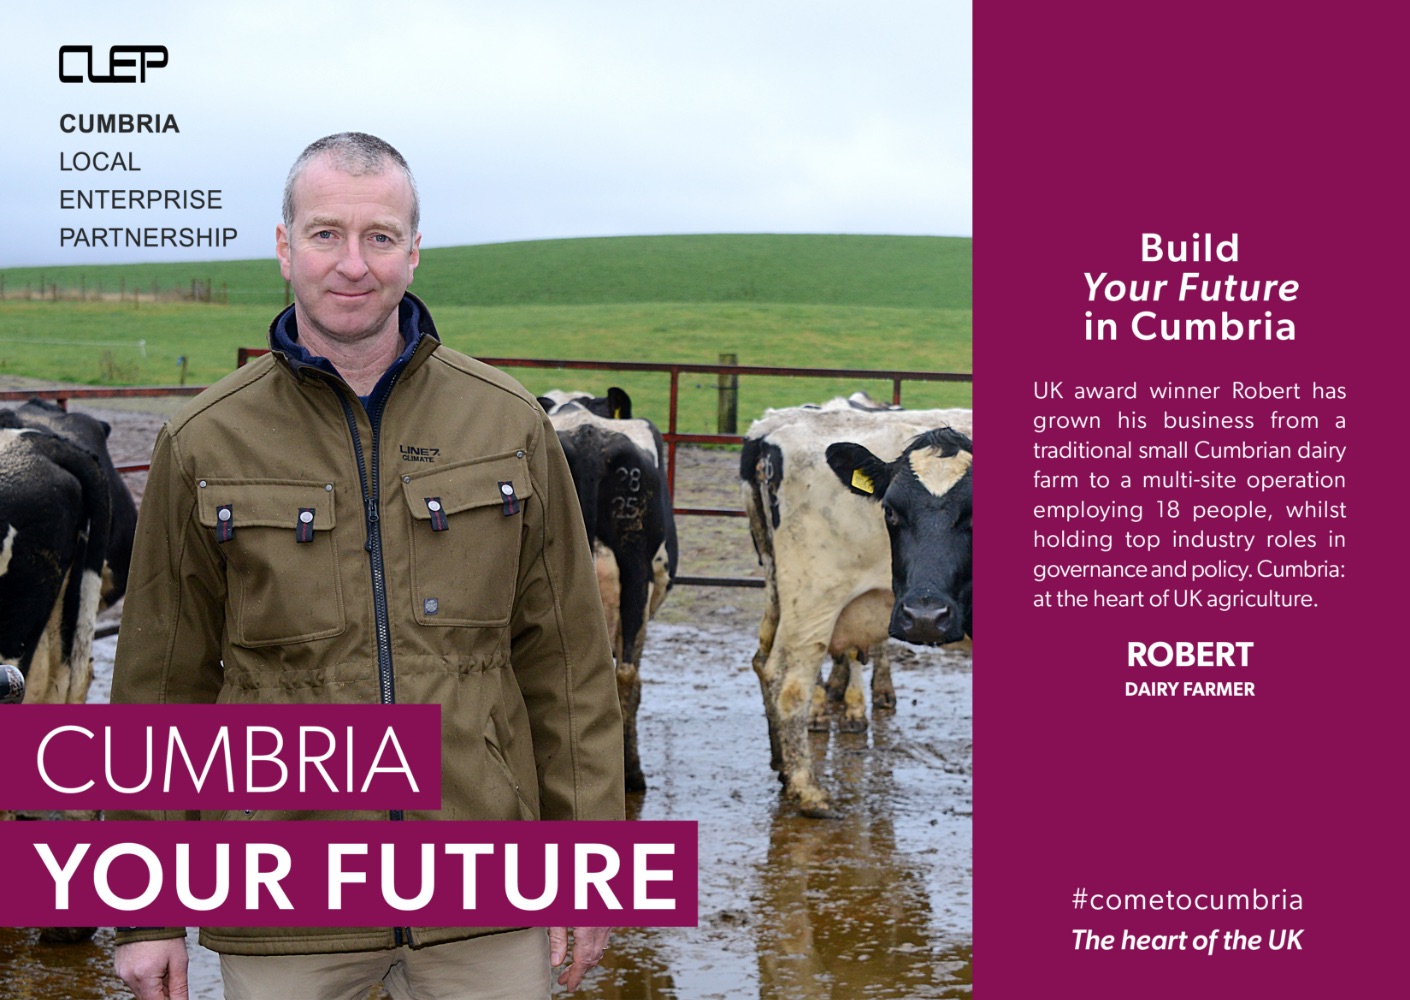 Build Your Future In Cumbria: UK award winner Robert has grown his business from a traditional small Cumbrian dairy farm to a multi-site operation employing 18 people, whilst holding top industry roles in governance and policy. Cumbria: at the heart of UK agriculture. (Photo: Robert, diary farmer).